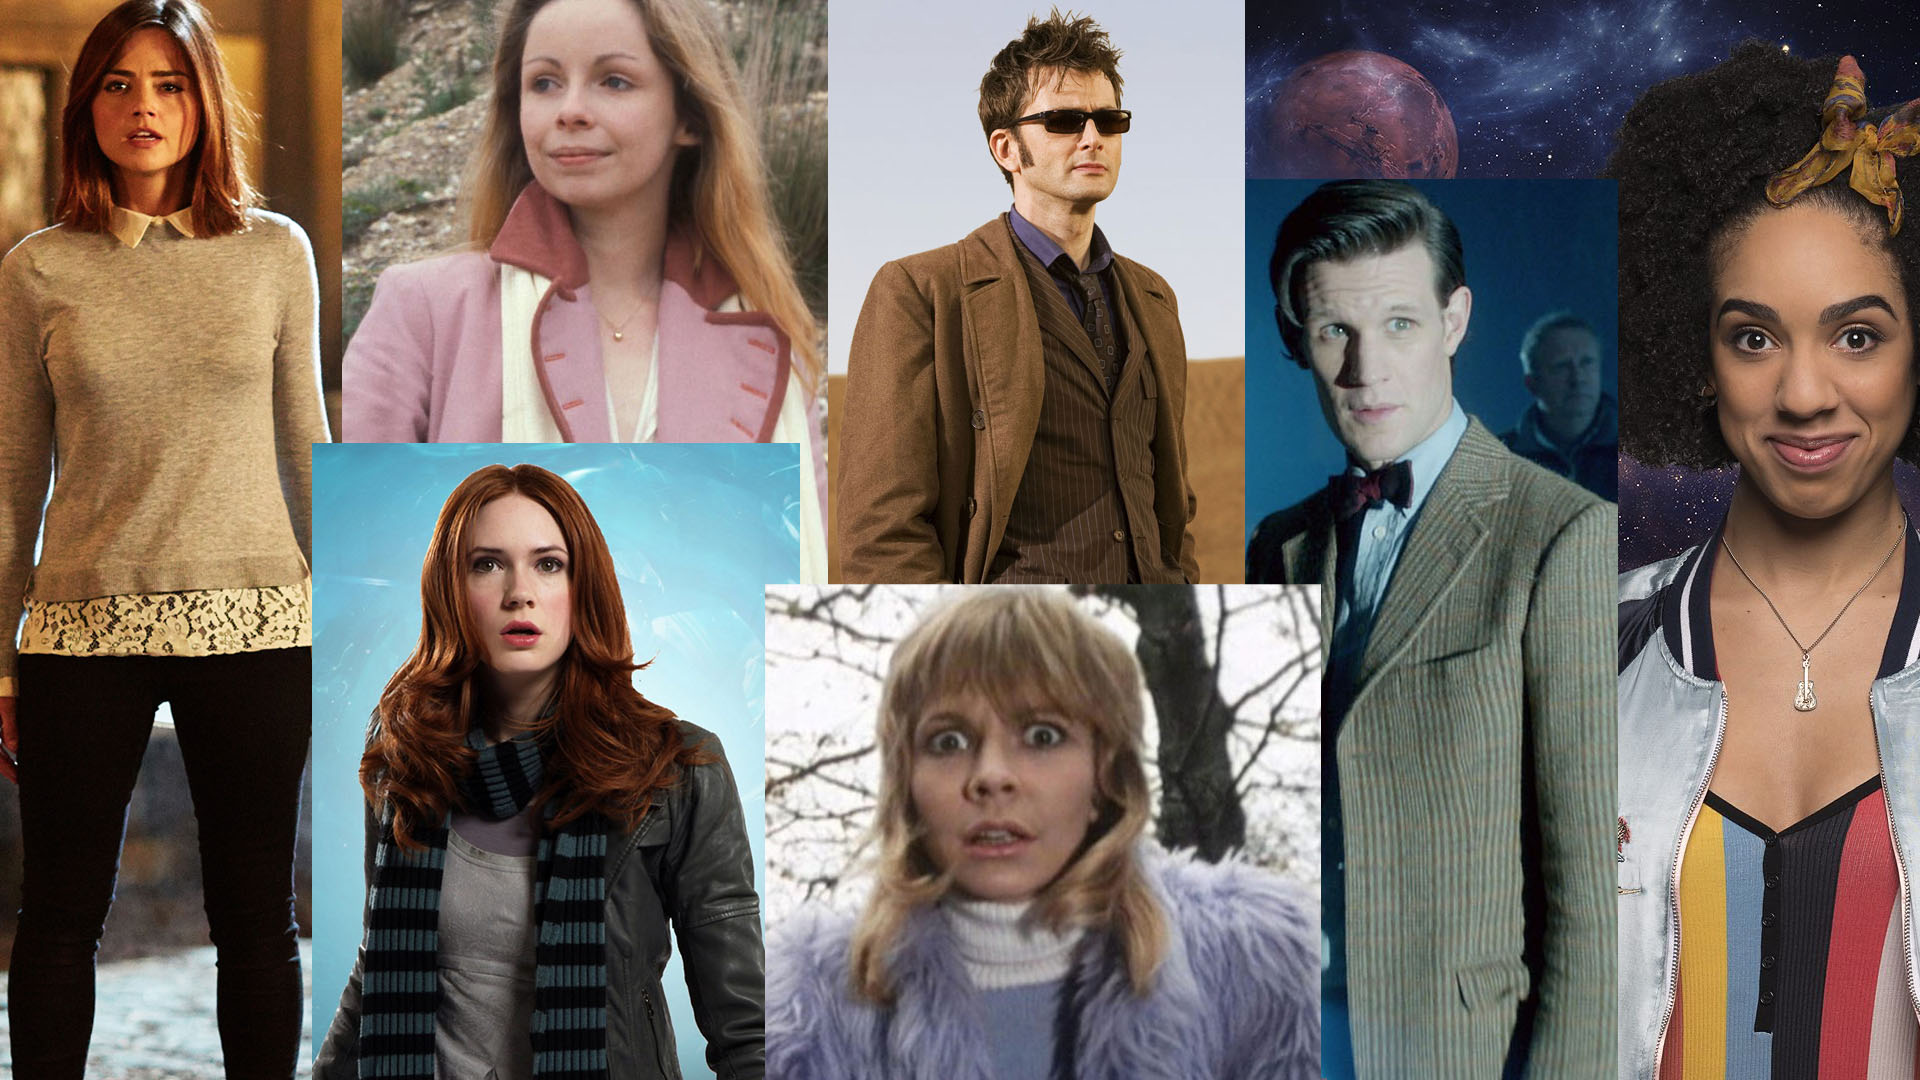 Never Mind the Bow Ties: 10 'Doctor Who' Style Icons, From the Tenth Doctor to Amy Pond